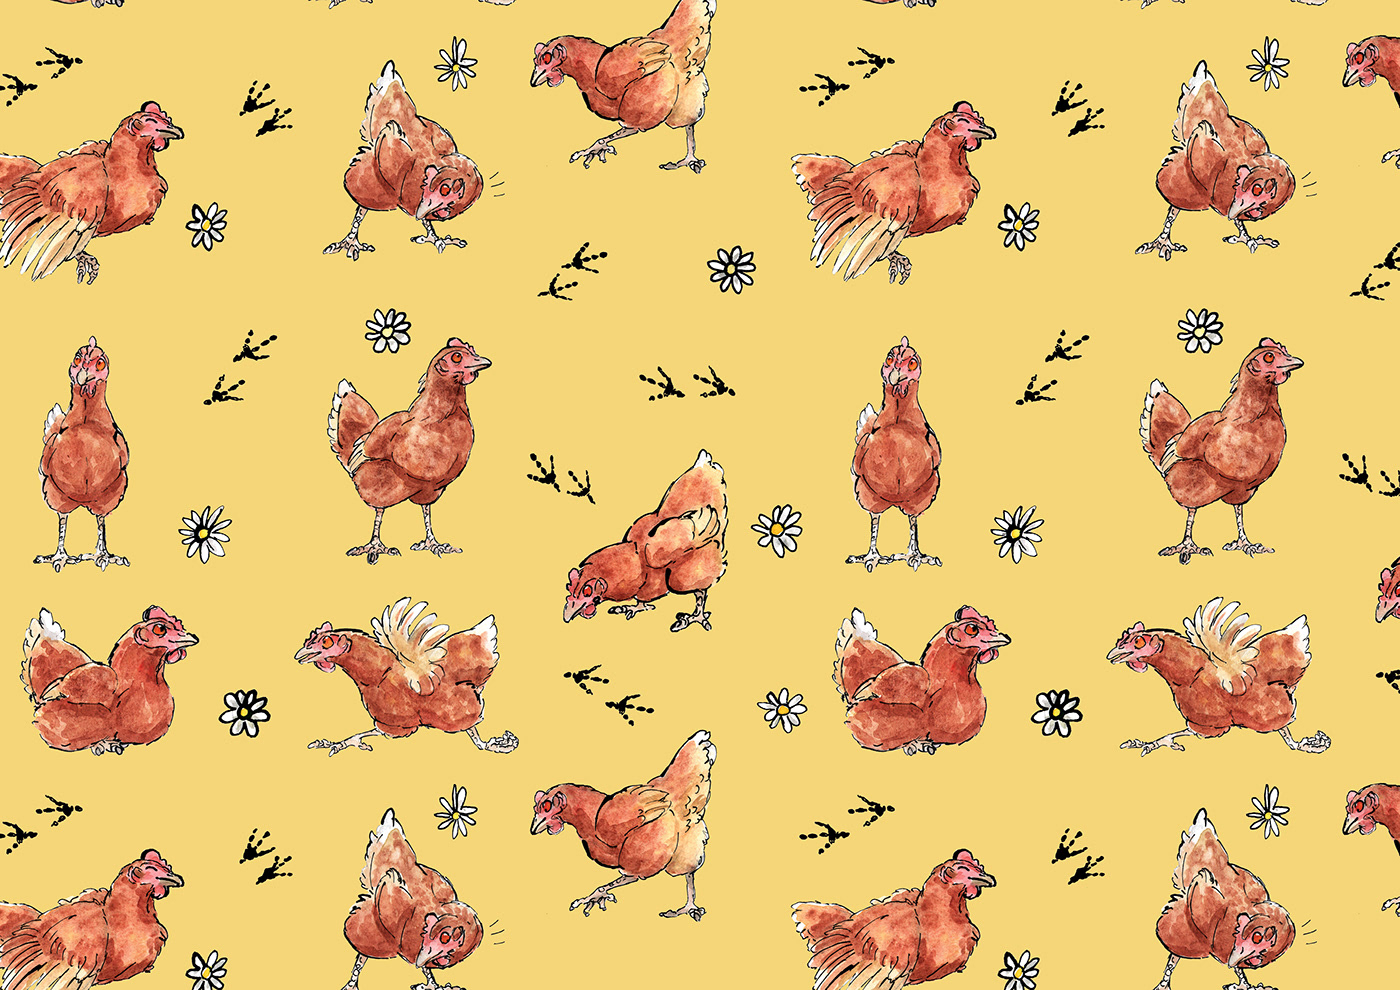 animals cats chickens dogs fabric design ILLUSTRATION  pattern illustration repeating pattern surface design surface illustration